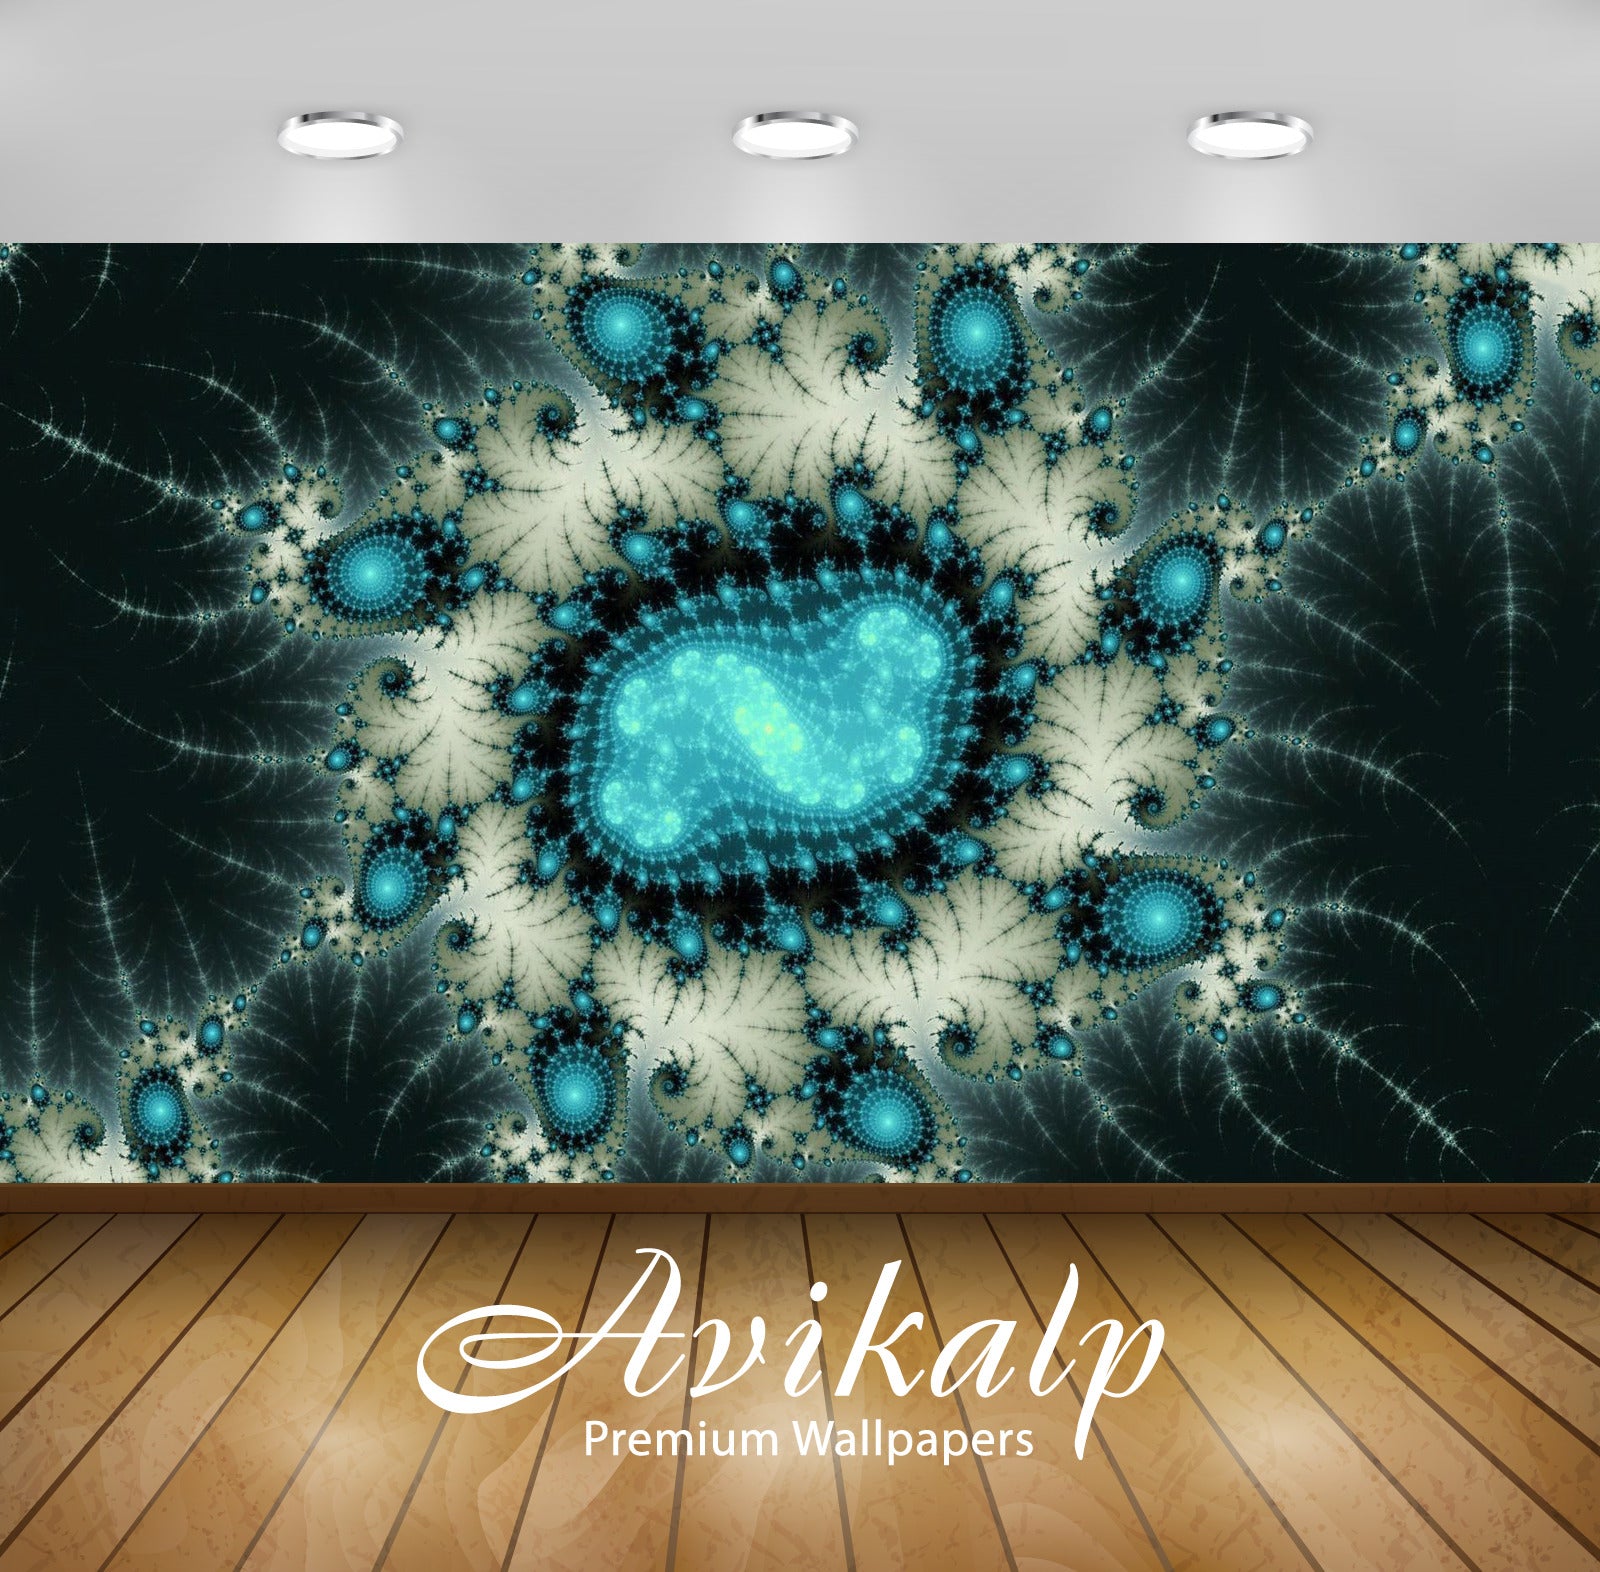 Avikalp Exclusive Awi4078 Blue Swirly Fractal Shapes Full HD Wallpapers for Living room, Hall, Kids